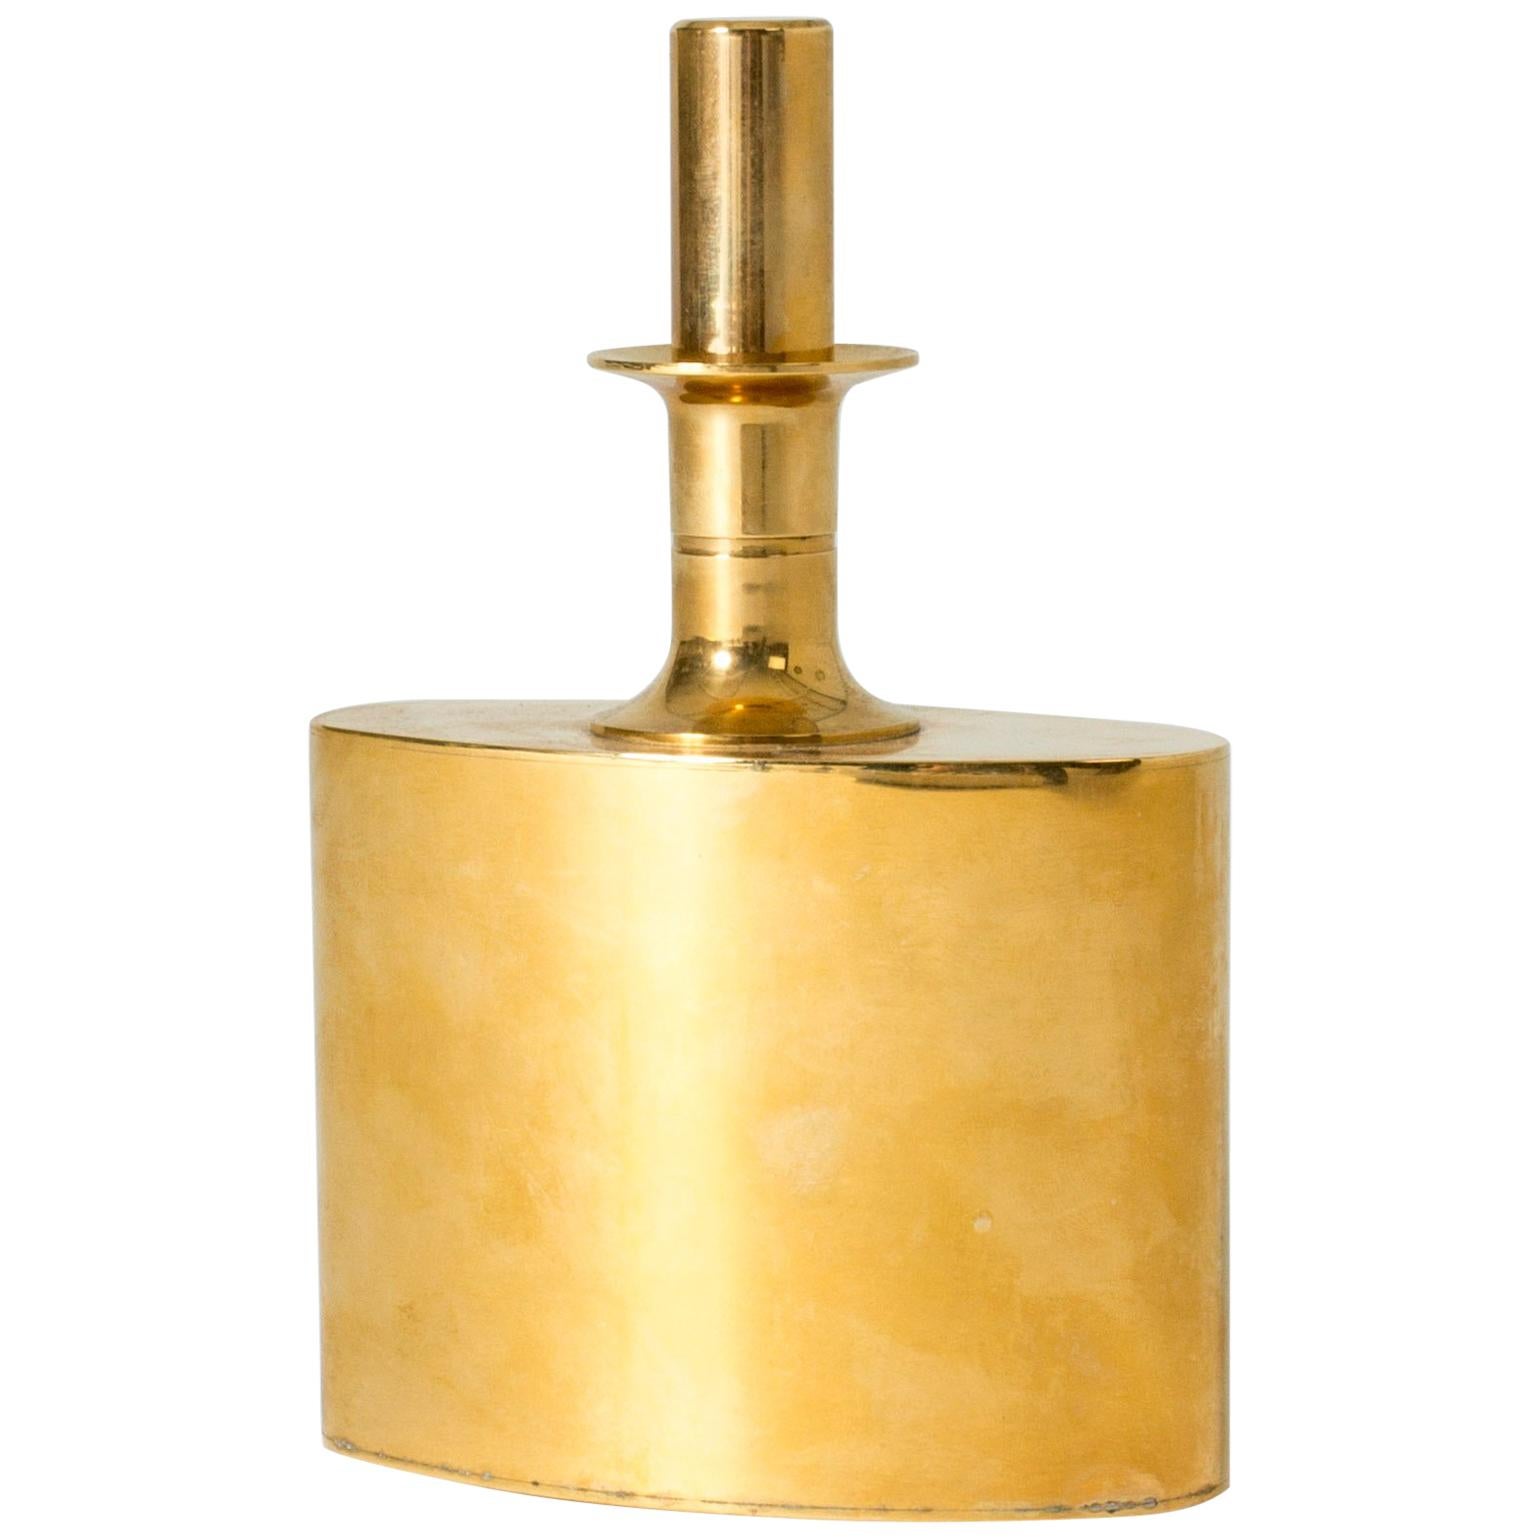 Gilded Brass Flask by Pierre Forssell for Skultuna